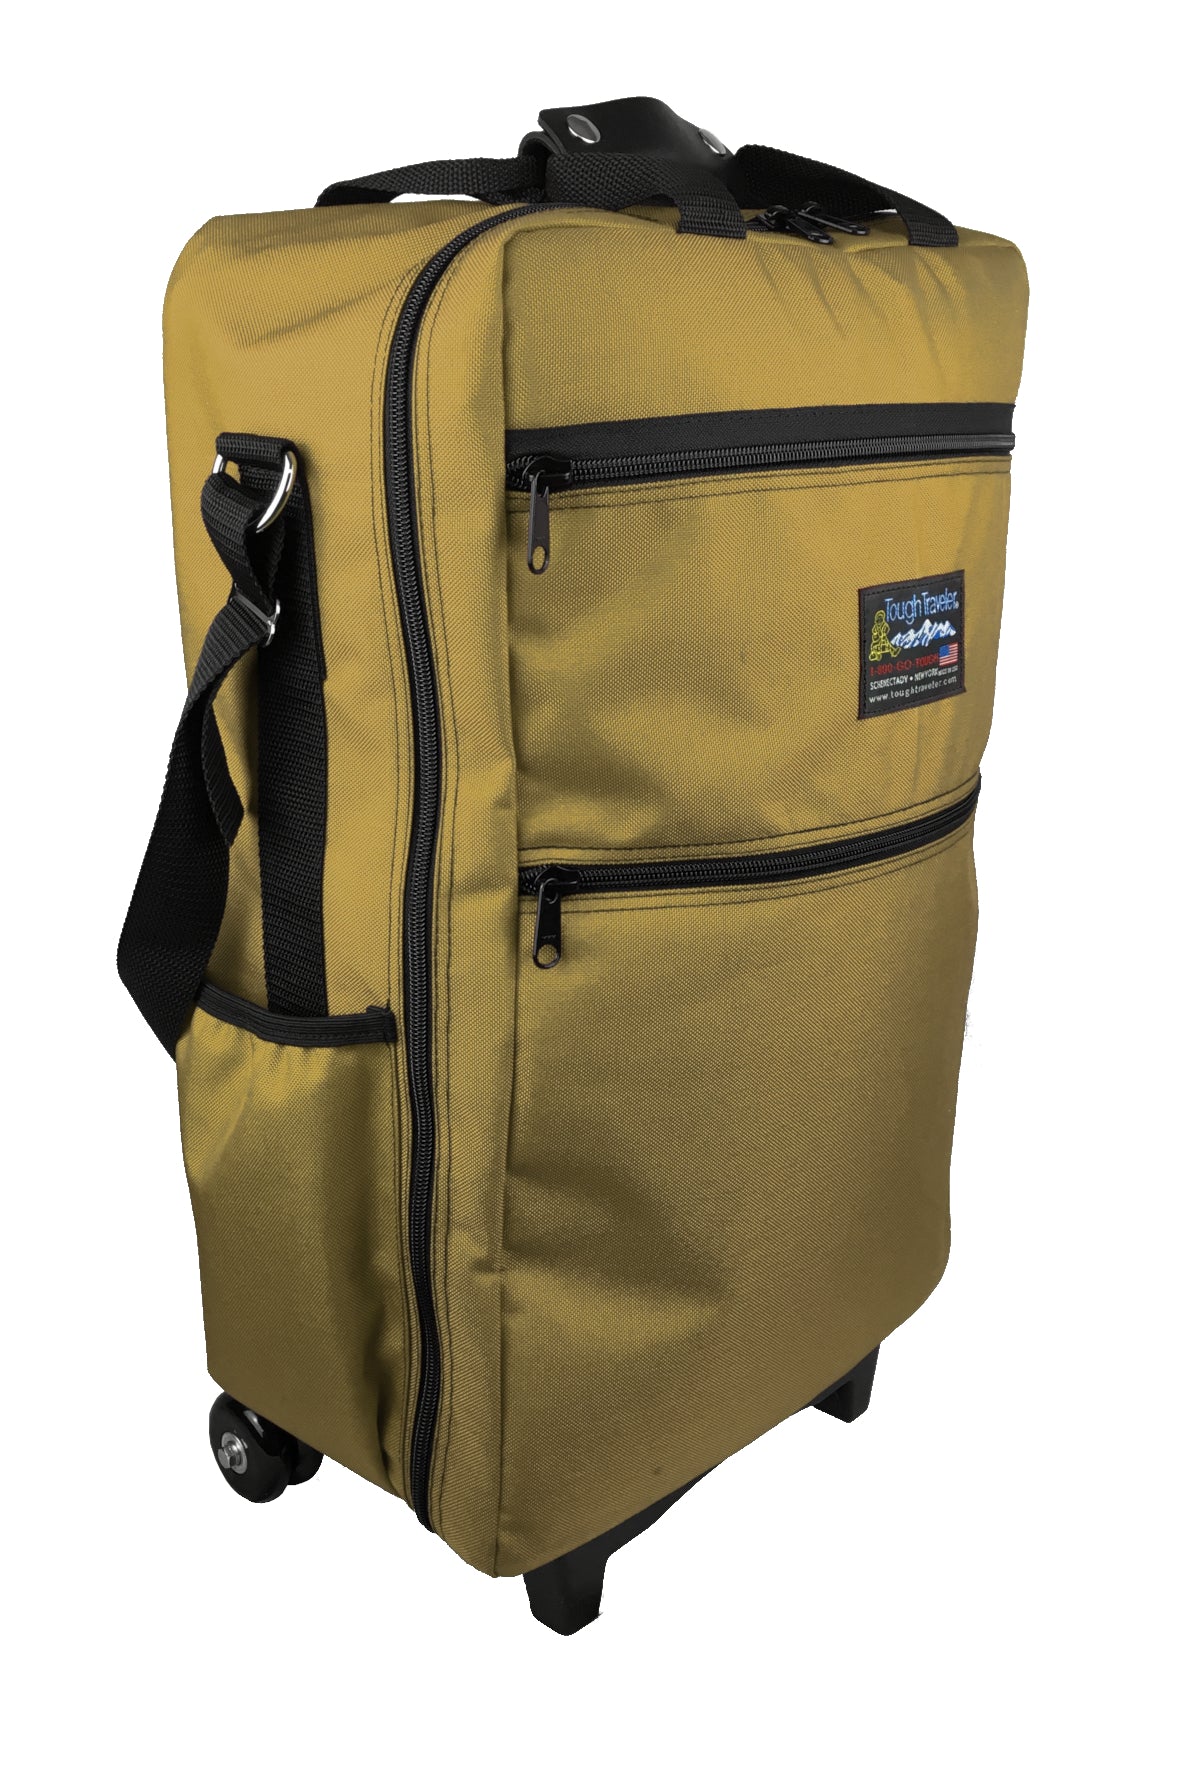 Carry, Wheeled, Backpack, & Wheeled Backpack Bags: Which One Is